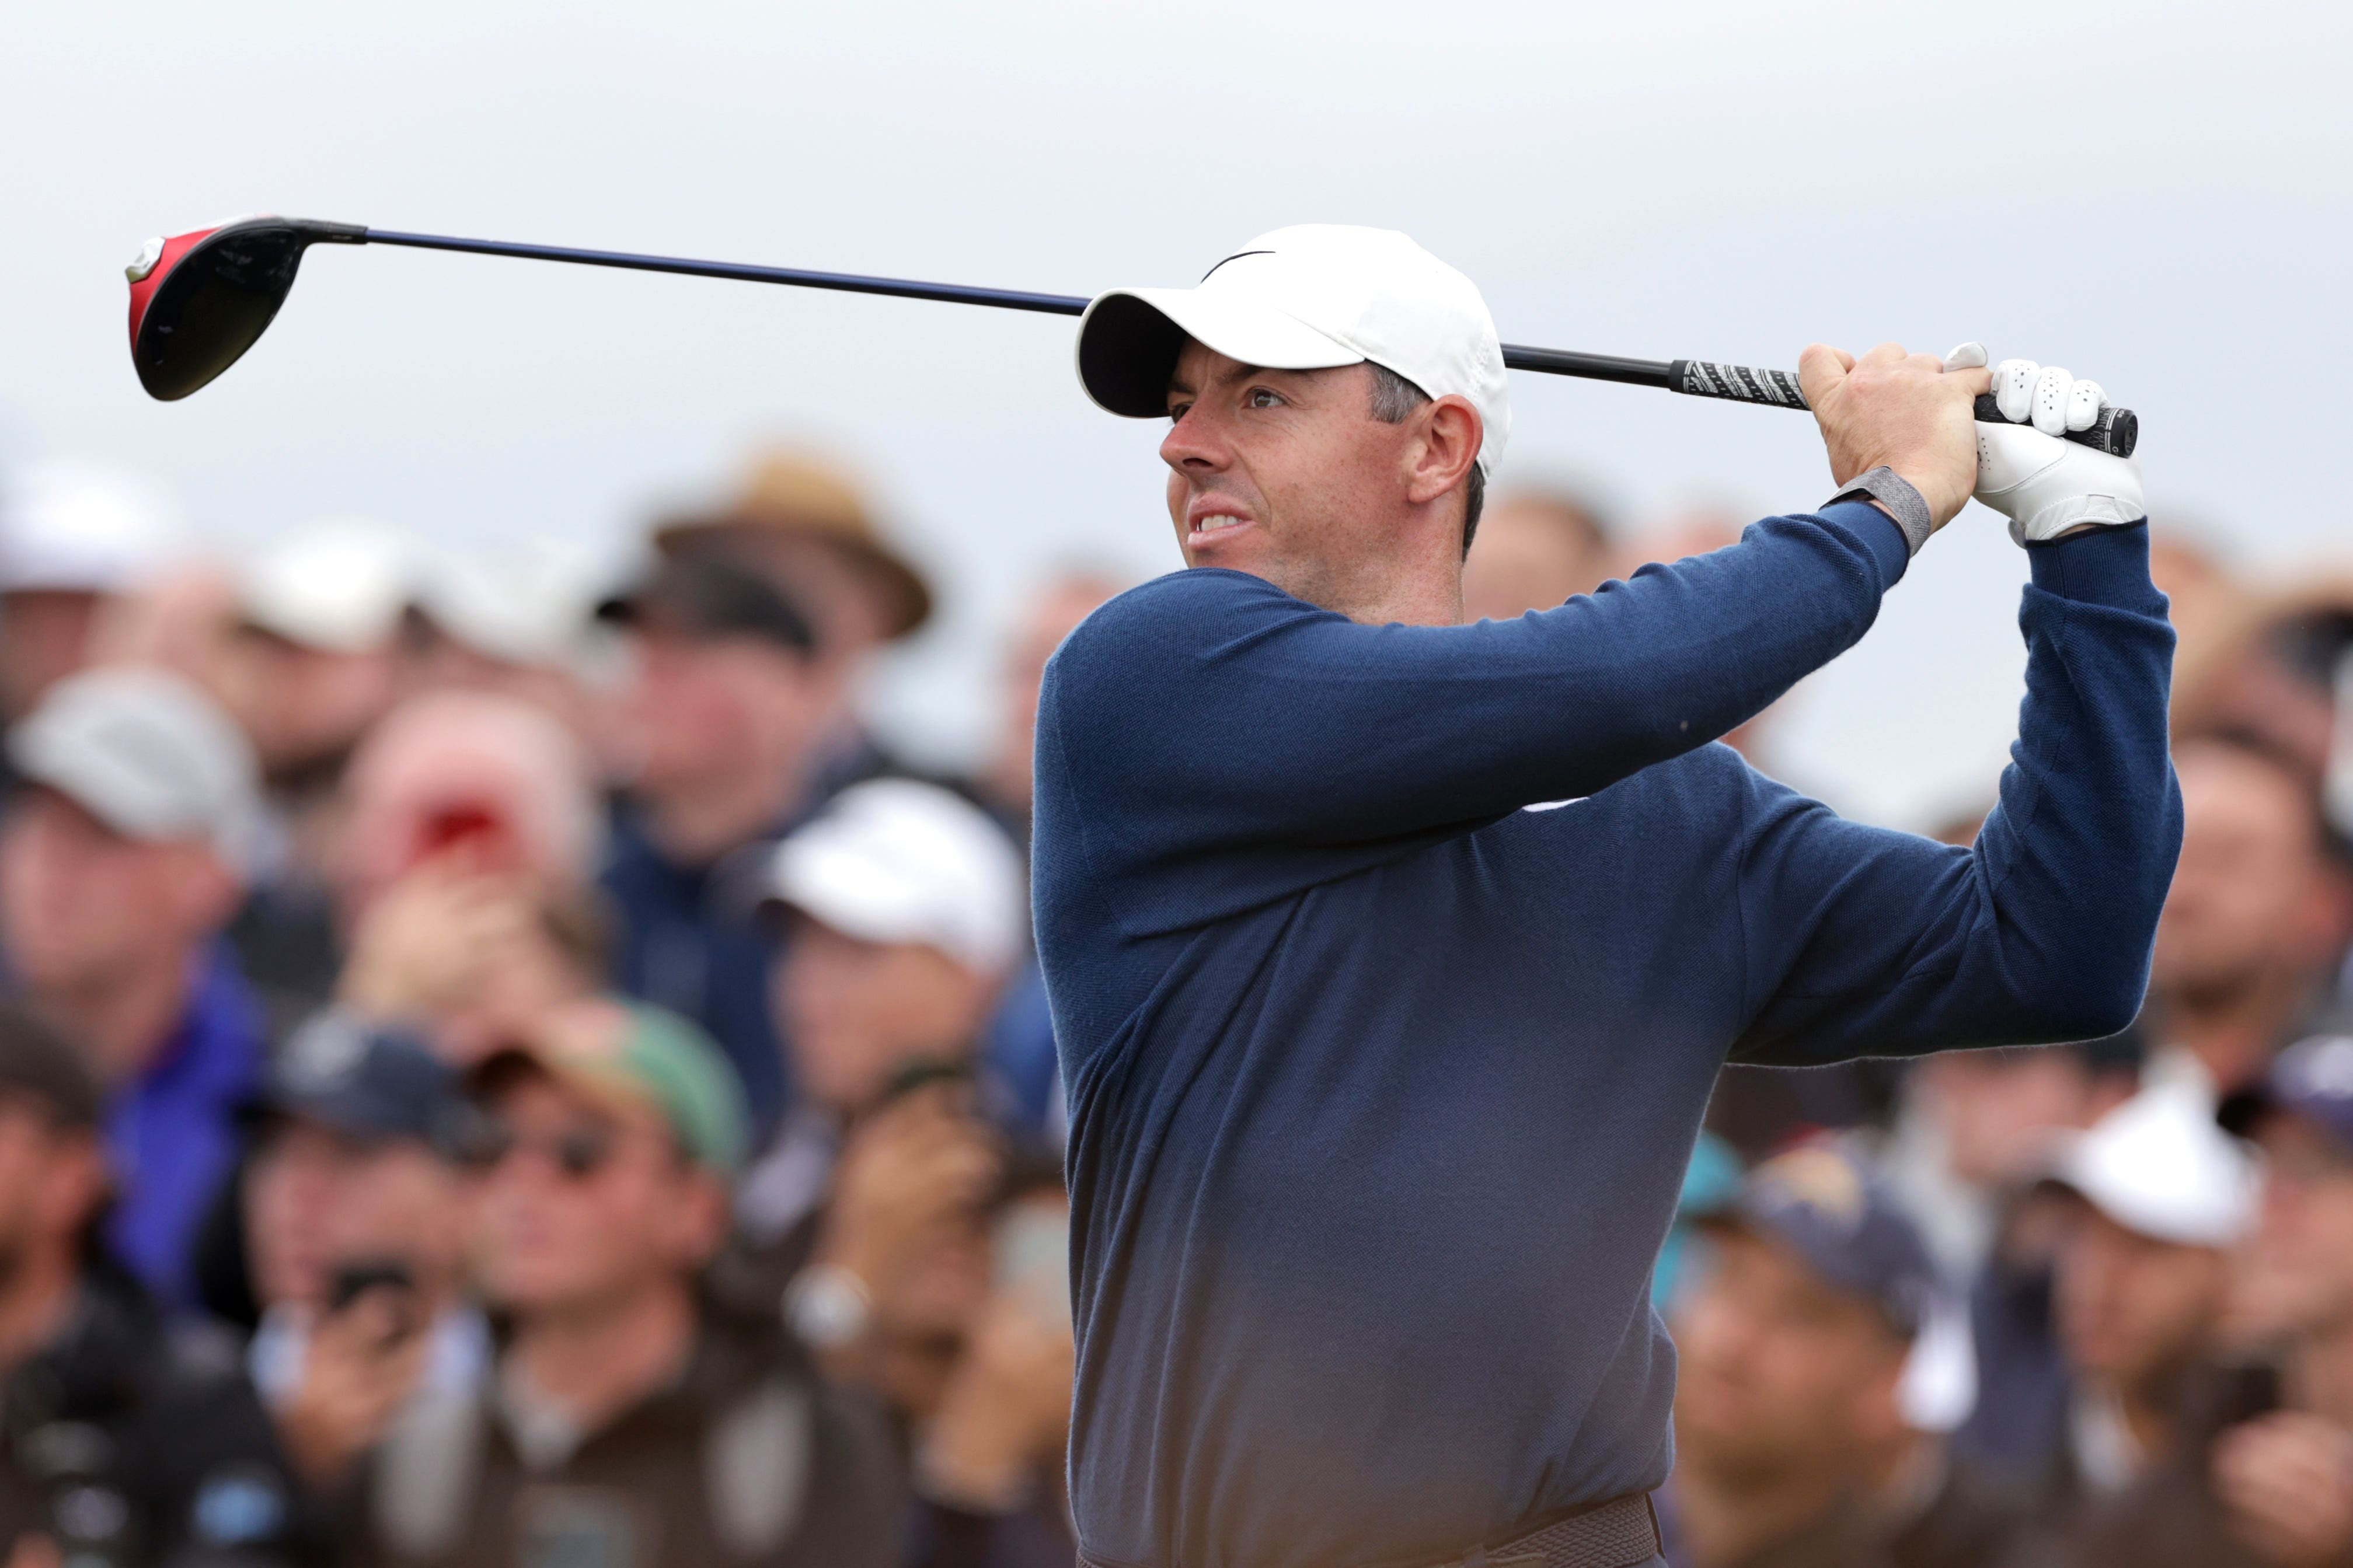 Rory McIlroy leads at the halfway stage of the Scottish Open